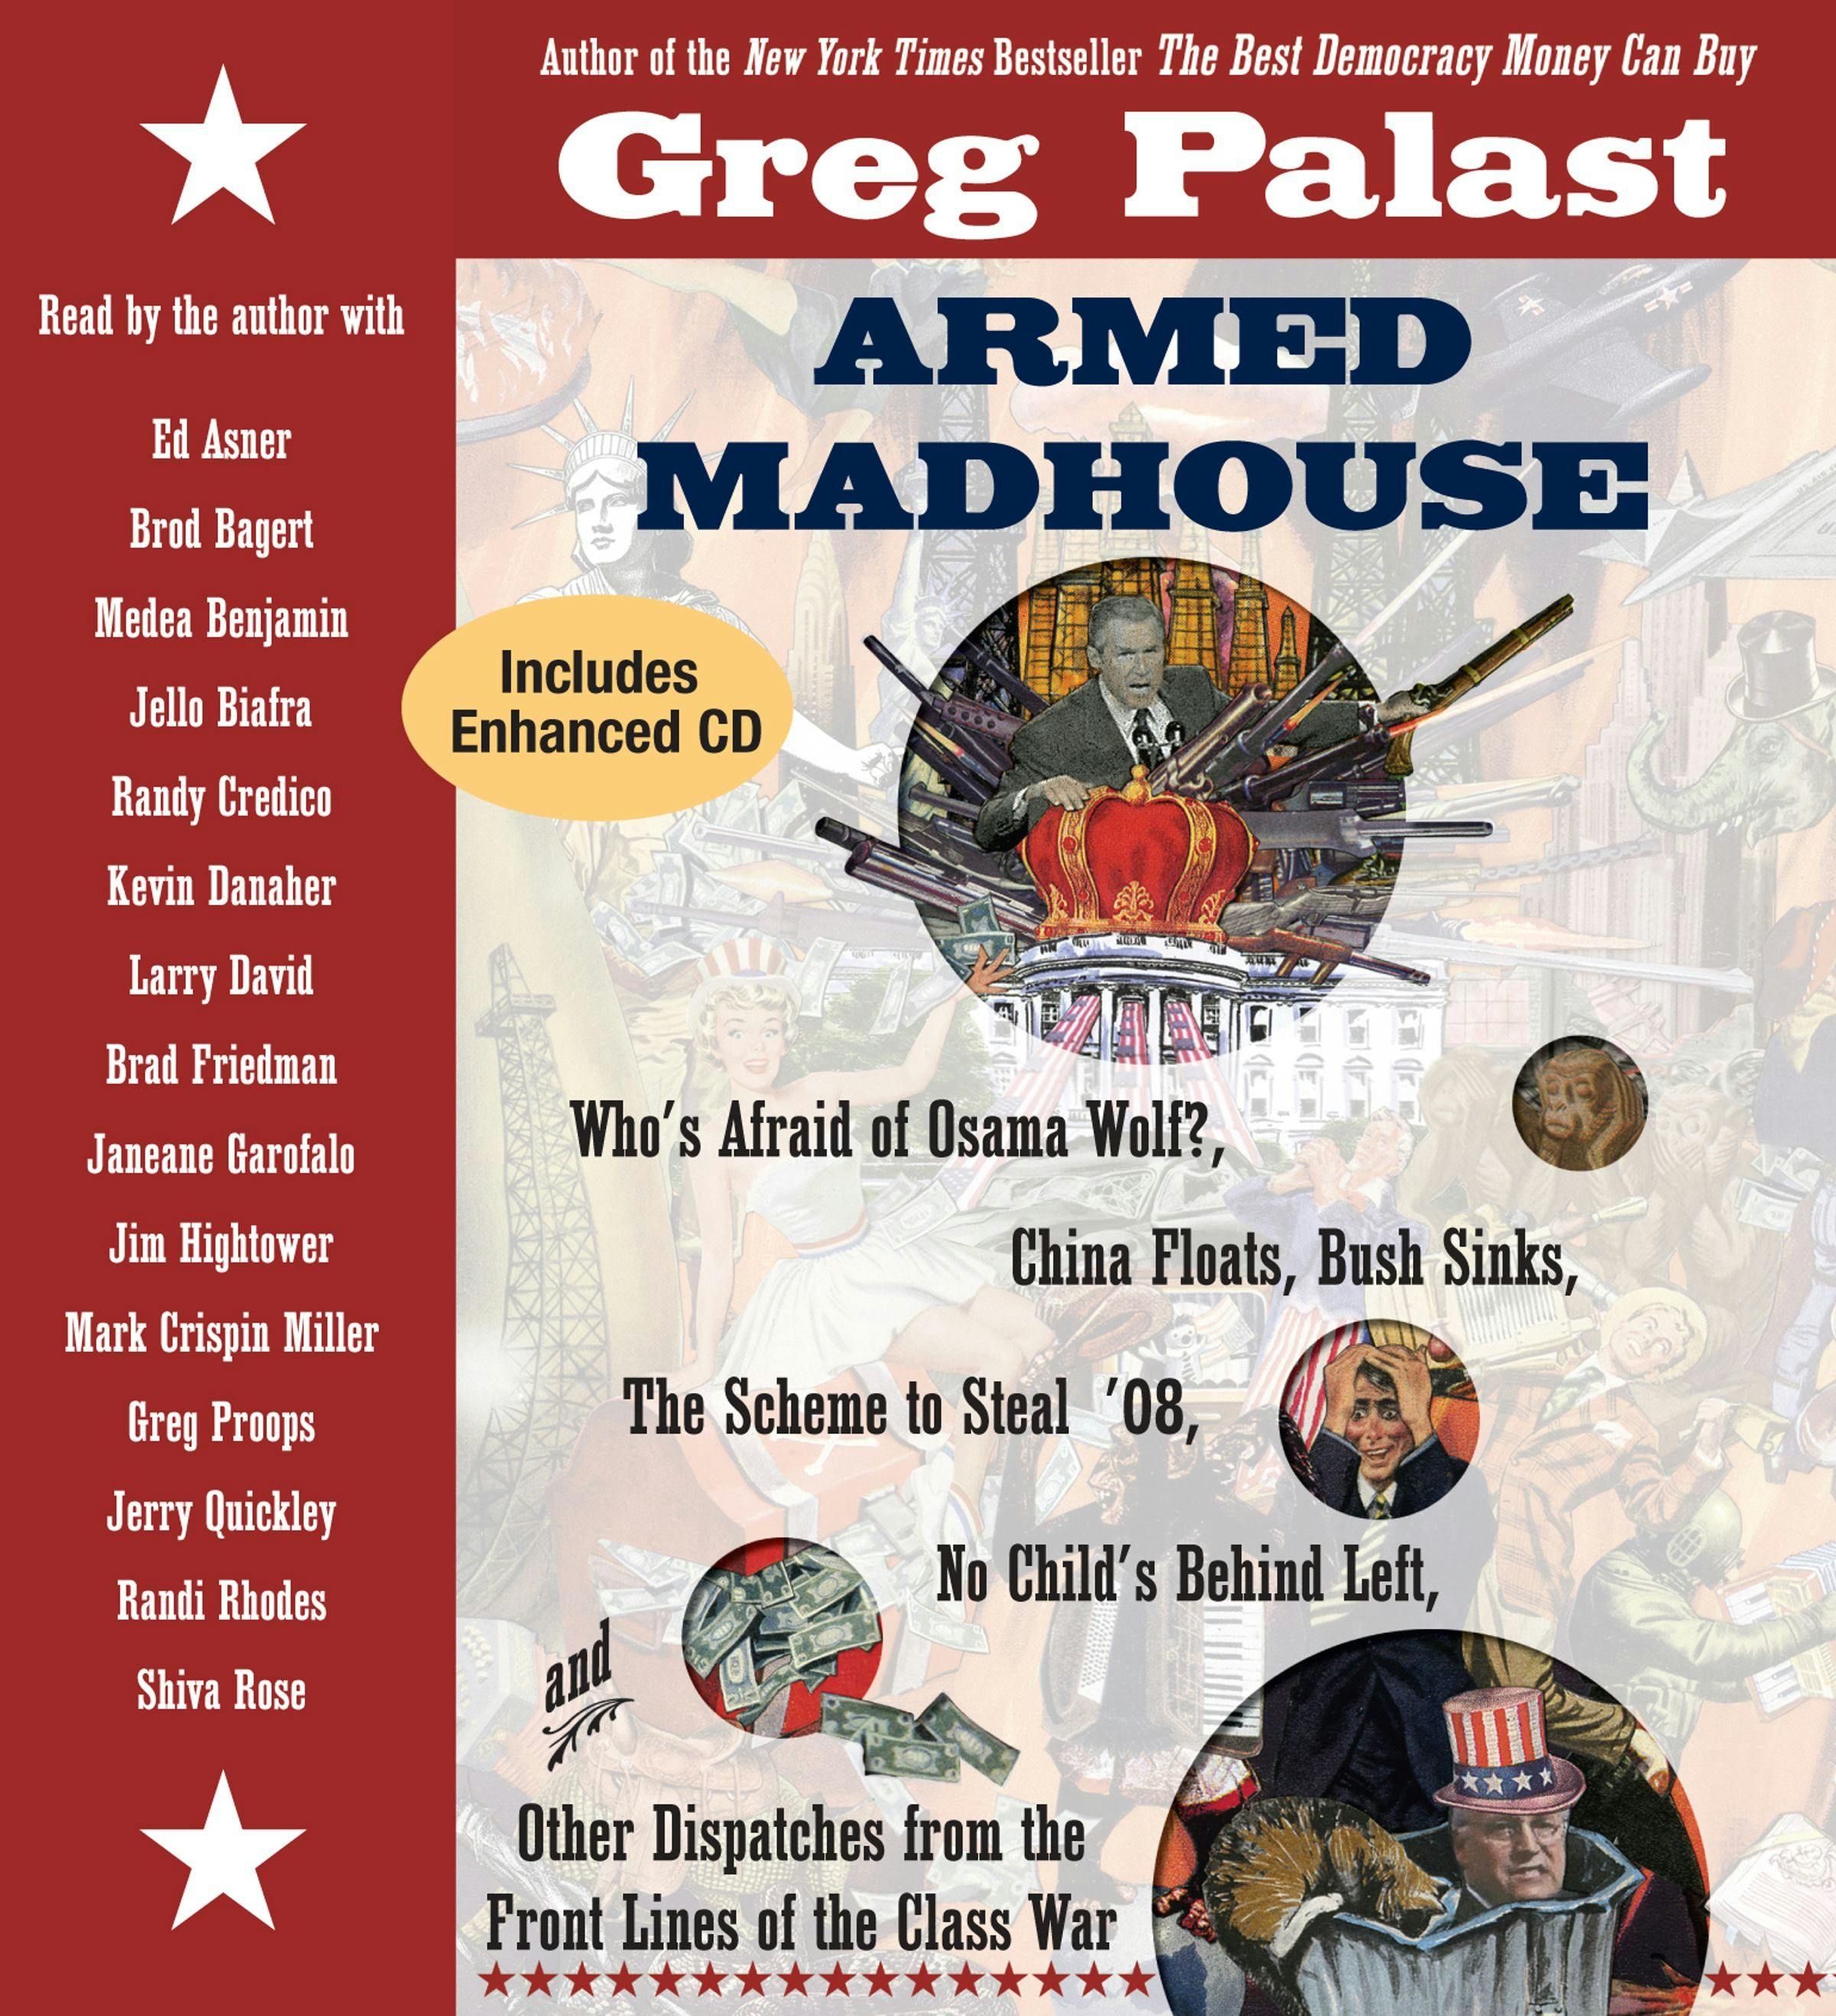 Armed Madhouse: Who's Afraid of Osama Wolf? China Floats, Bush Sinks, The Scheme to Steal '08, No Child's Behind Left, and Other Dispatches from the Front Lines of the Class War - Brod Bagert, Janeane Garofalo, Jim Hightower, Randi Rhodes, Brad Friedman, Mark Crispin Miller, Larry David, Jello Biafra, Medea Benjamin, Amy E. Goodman, Greg Palast, Shiva Rose, Randy Credico, Greg Proops, Kevin Danaher